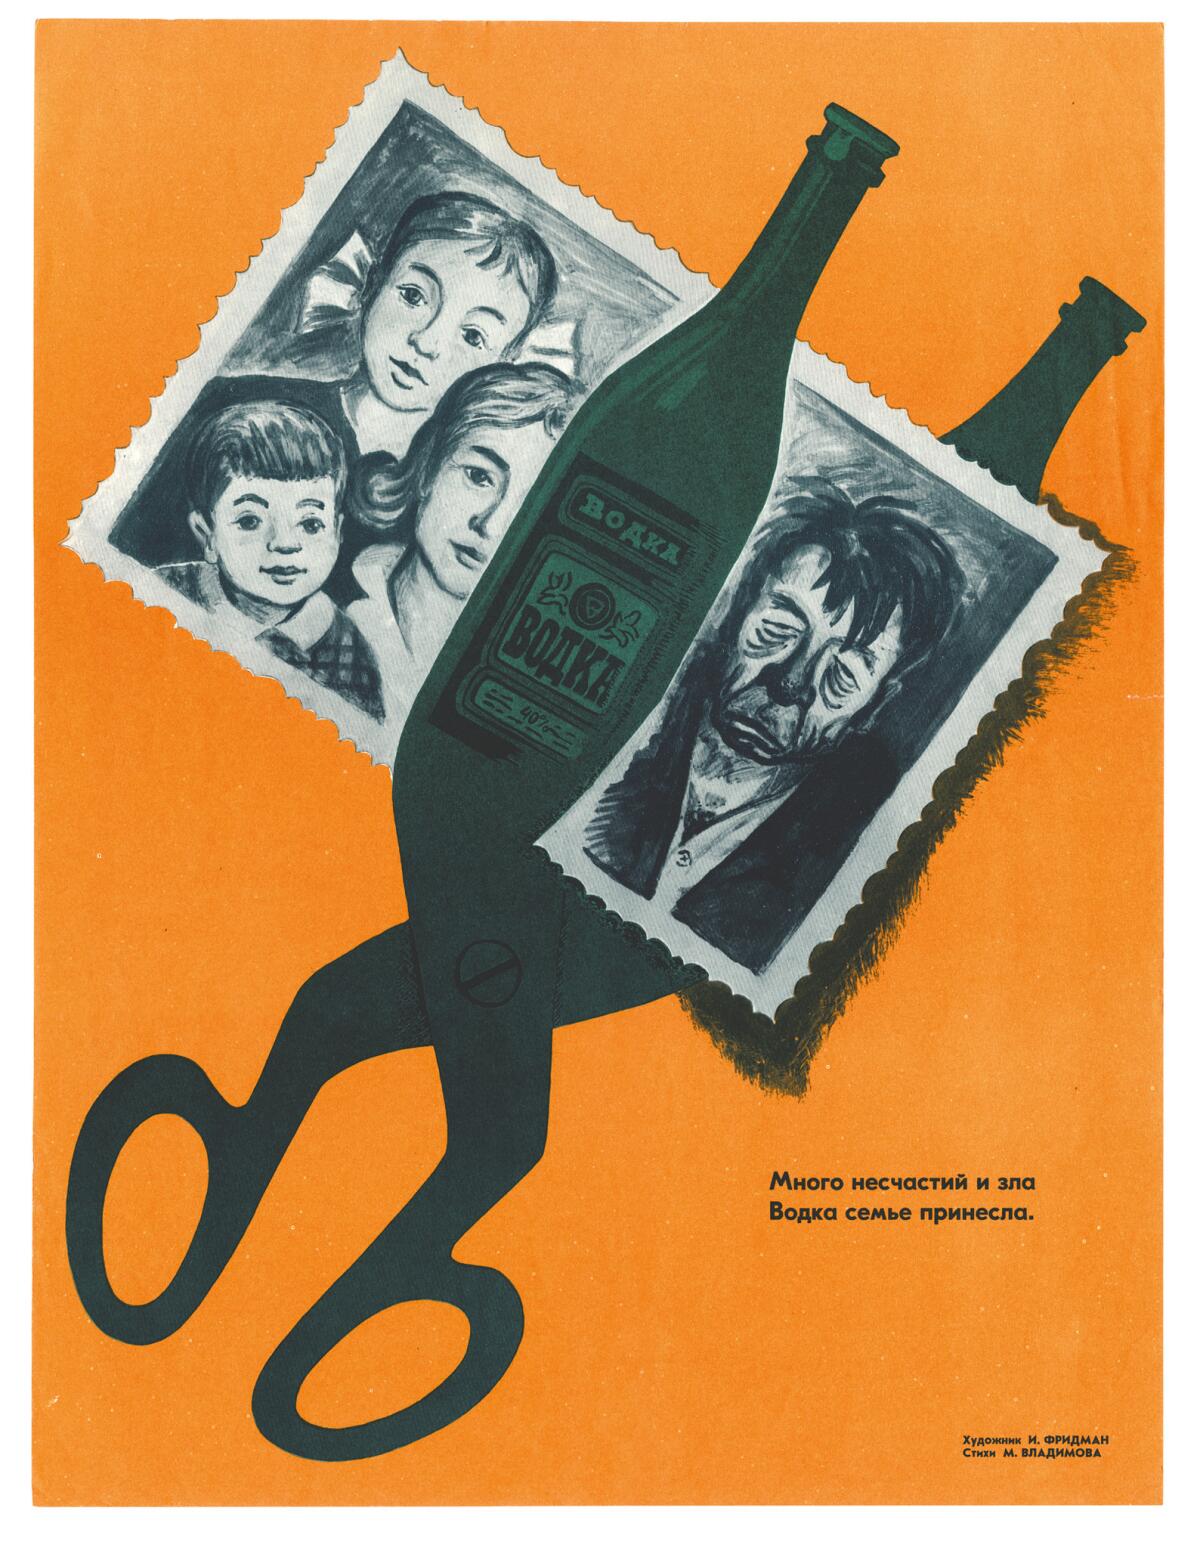 A 1977 design from "Alcohol: Soviet Anti-Alcohol Posters" reads, "Much evil and wrongdoing to the family." The text on the bottle says vodka. (I. Fridman / Fuel Publishing)